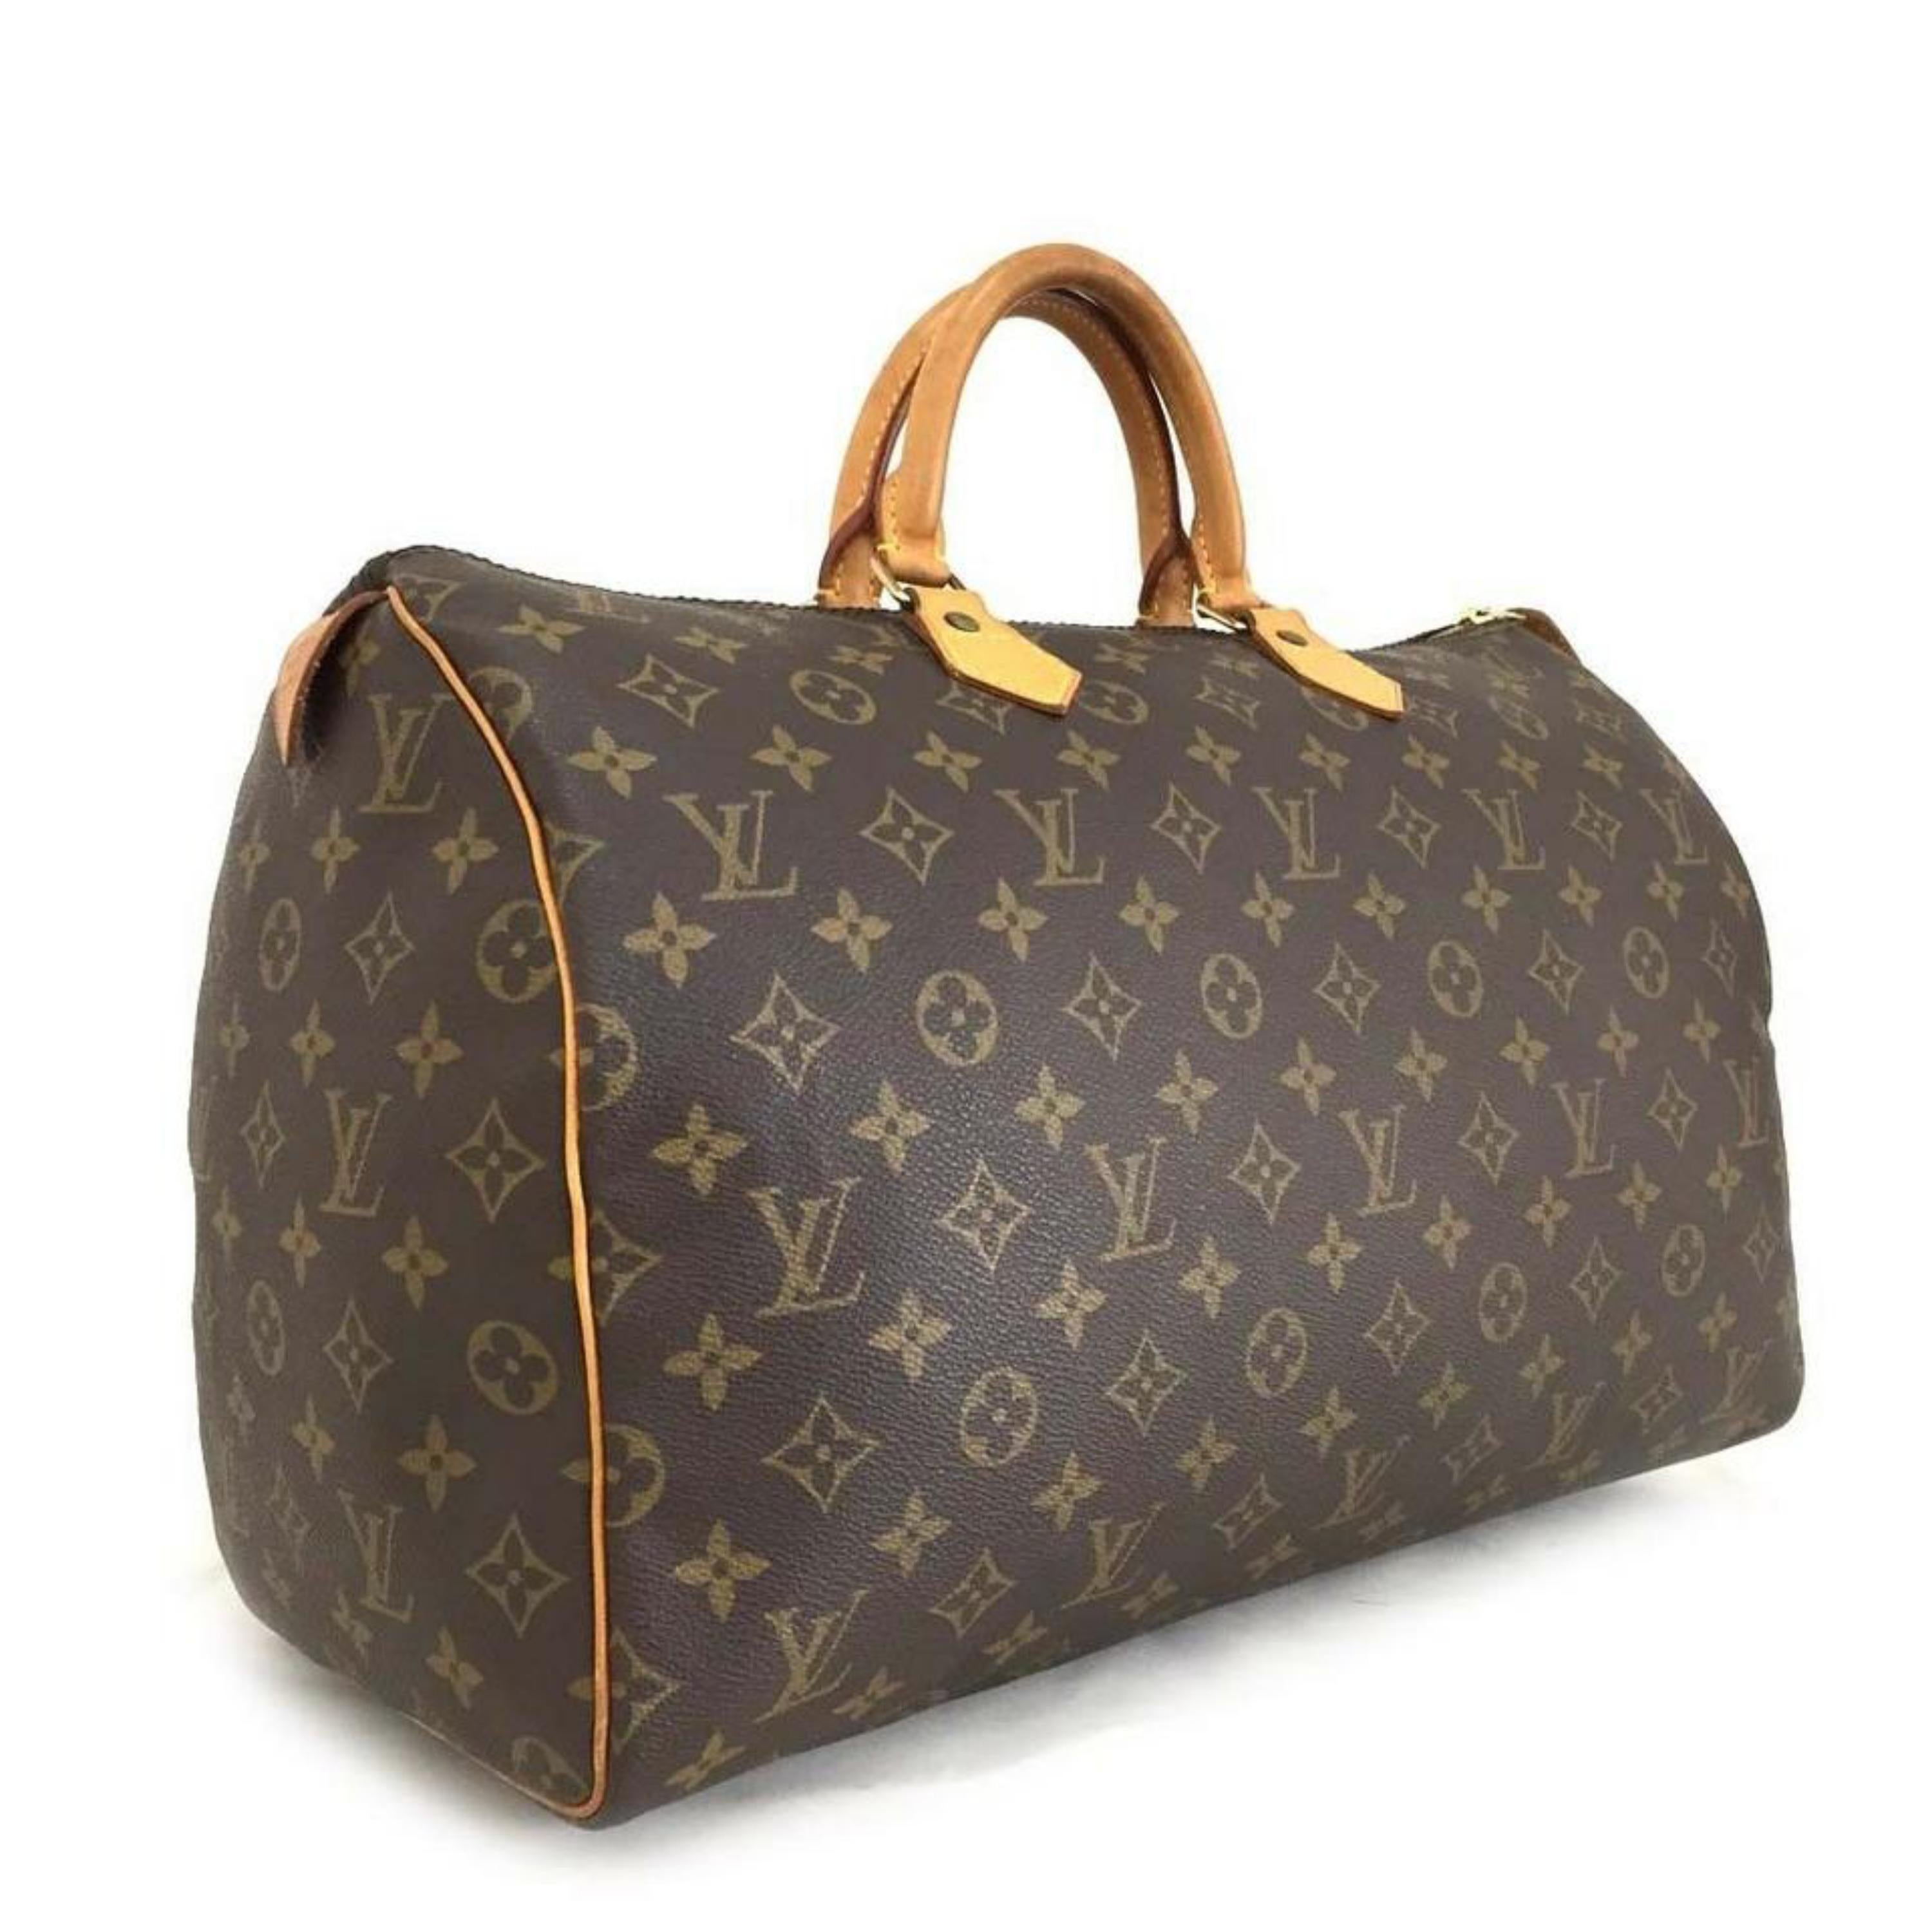 Louis Vuitton Speedy 40 Boston Gm 870010 Brown Coated Canvas Weekend/Travel Bag For Sale 3